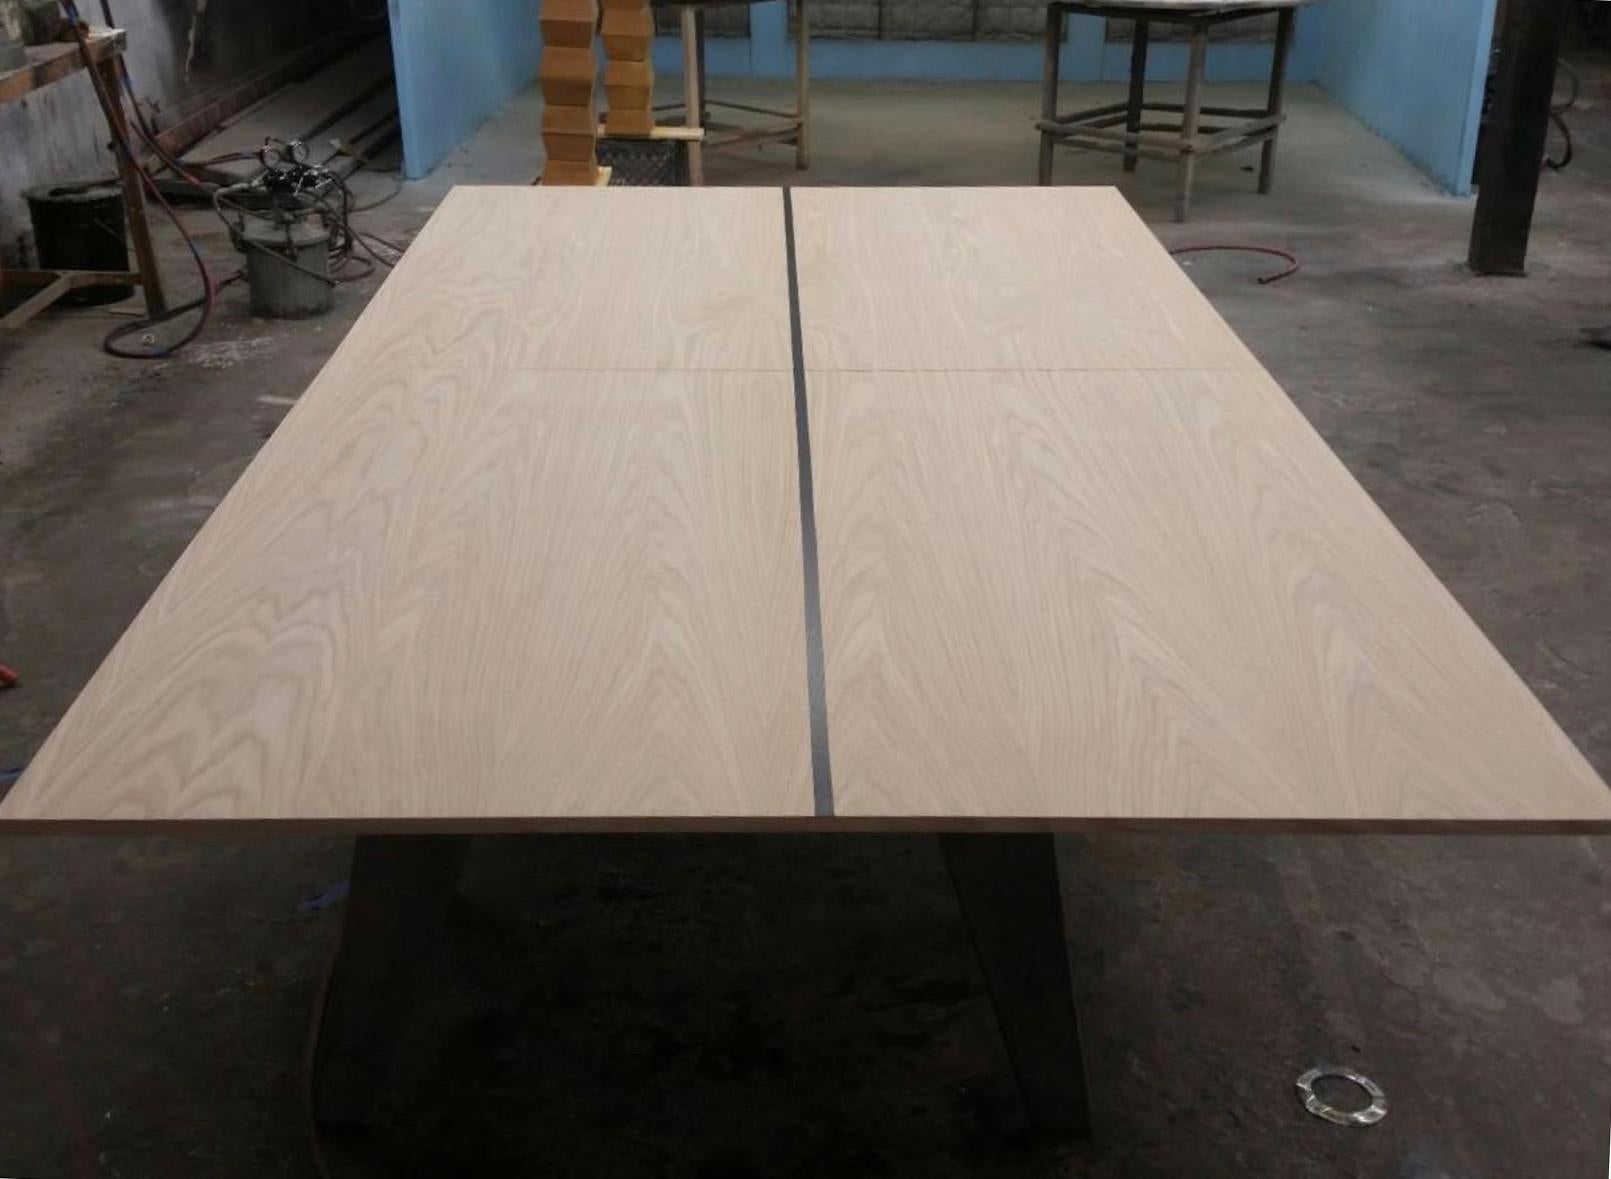 A white oak ping pong and dining table top for effortless conversion of the James de Wulf Billiards Table. The handsome white oak is chosen in this application for its strength, weight, and durability. The oak wood is hard and dense with a very